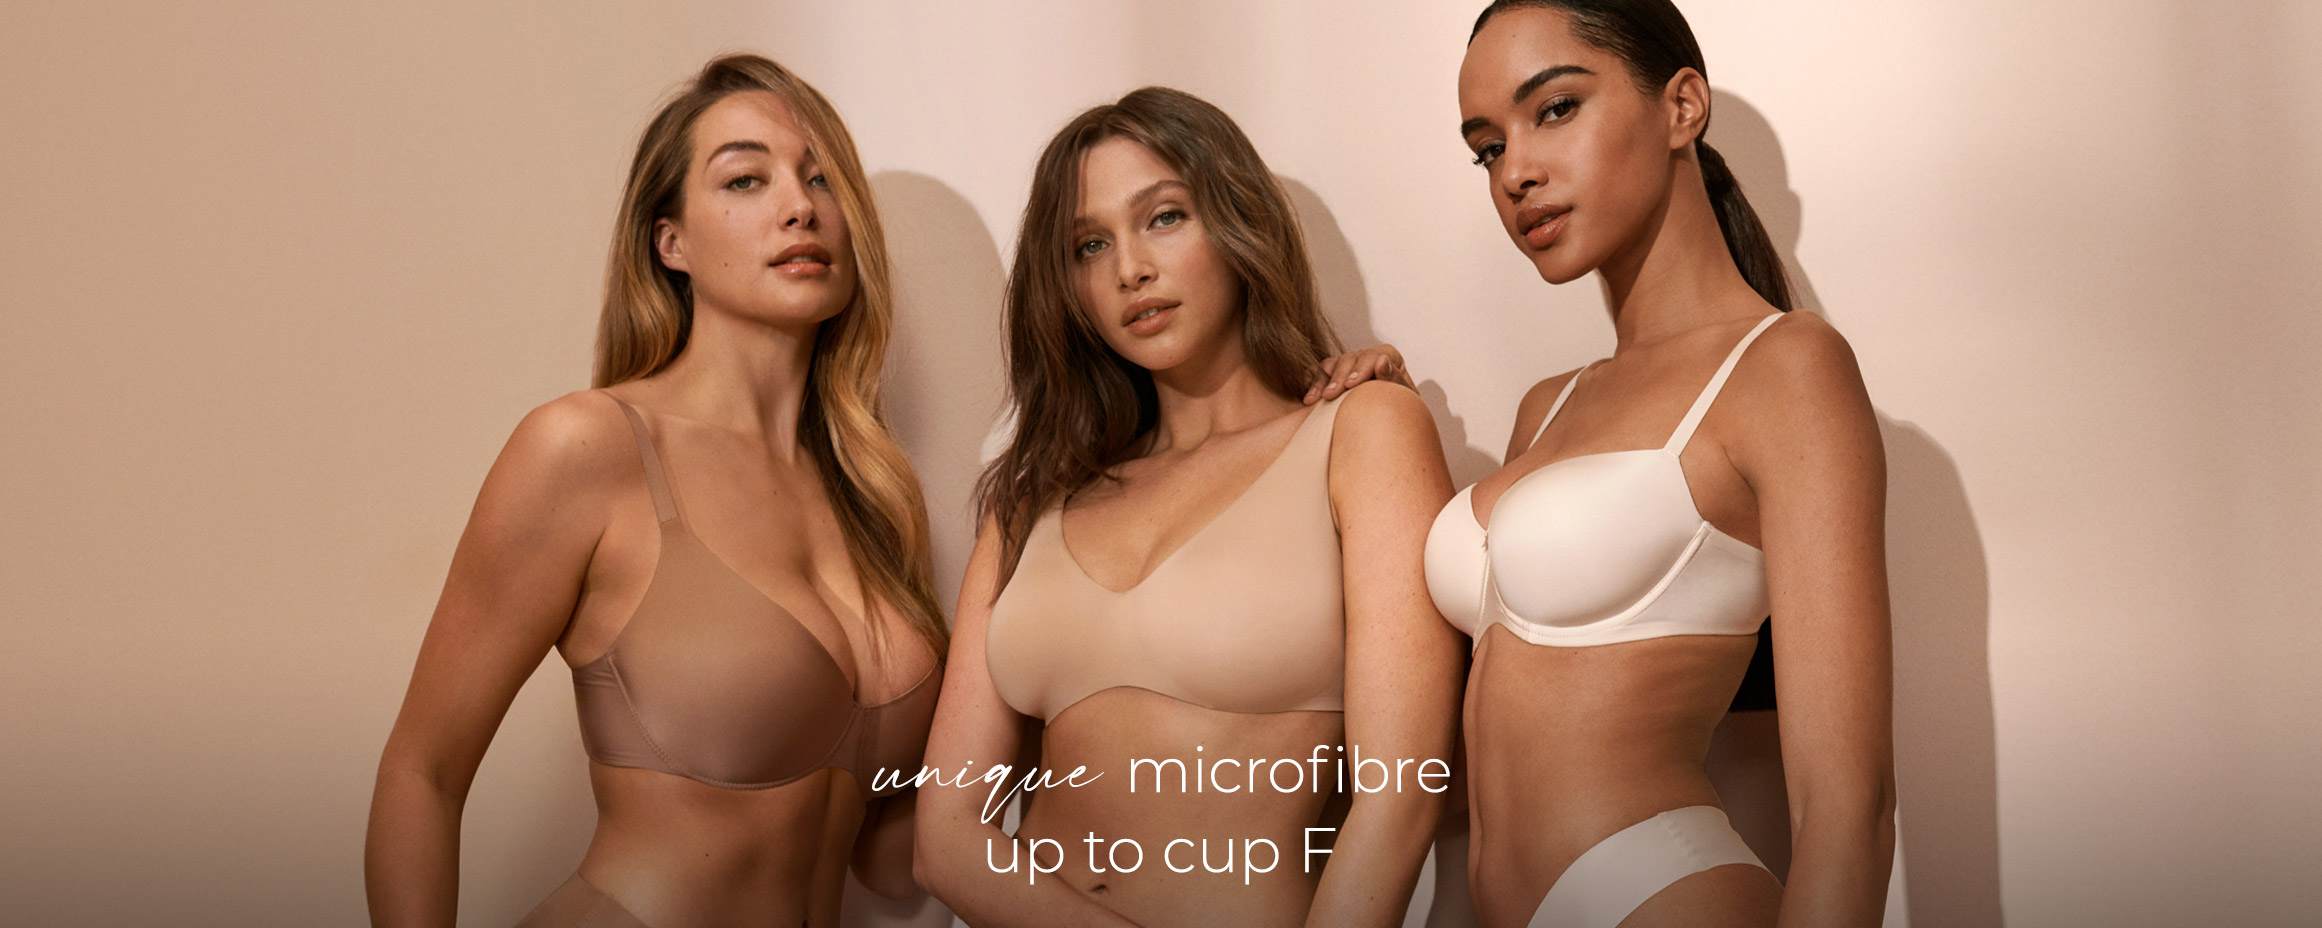 INTIMISSIMI - Brown sugar is the new protagonist of our